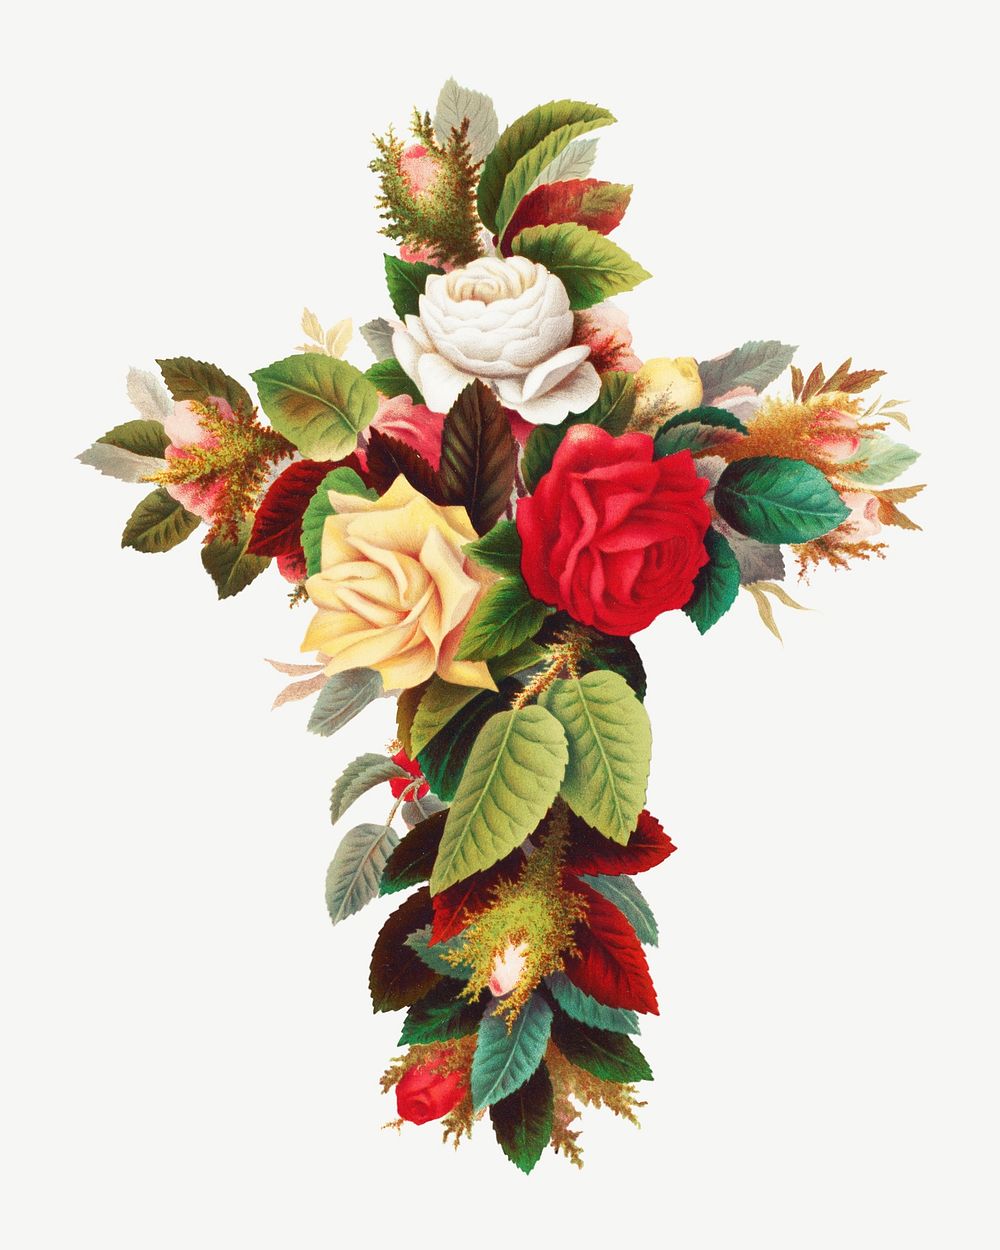 Cross of roses, vintage flower illustration by Olive E. Whitney psd. Remixed by rawpixel.